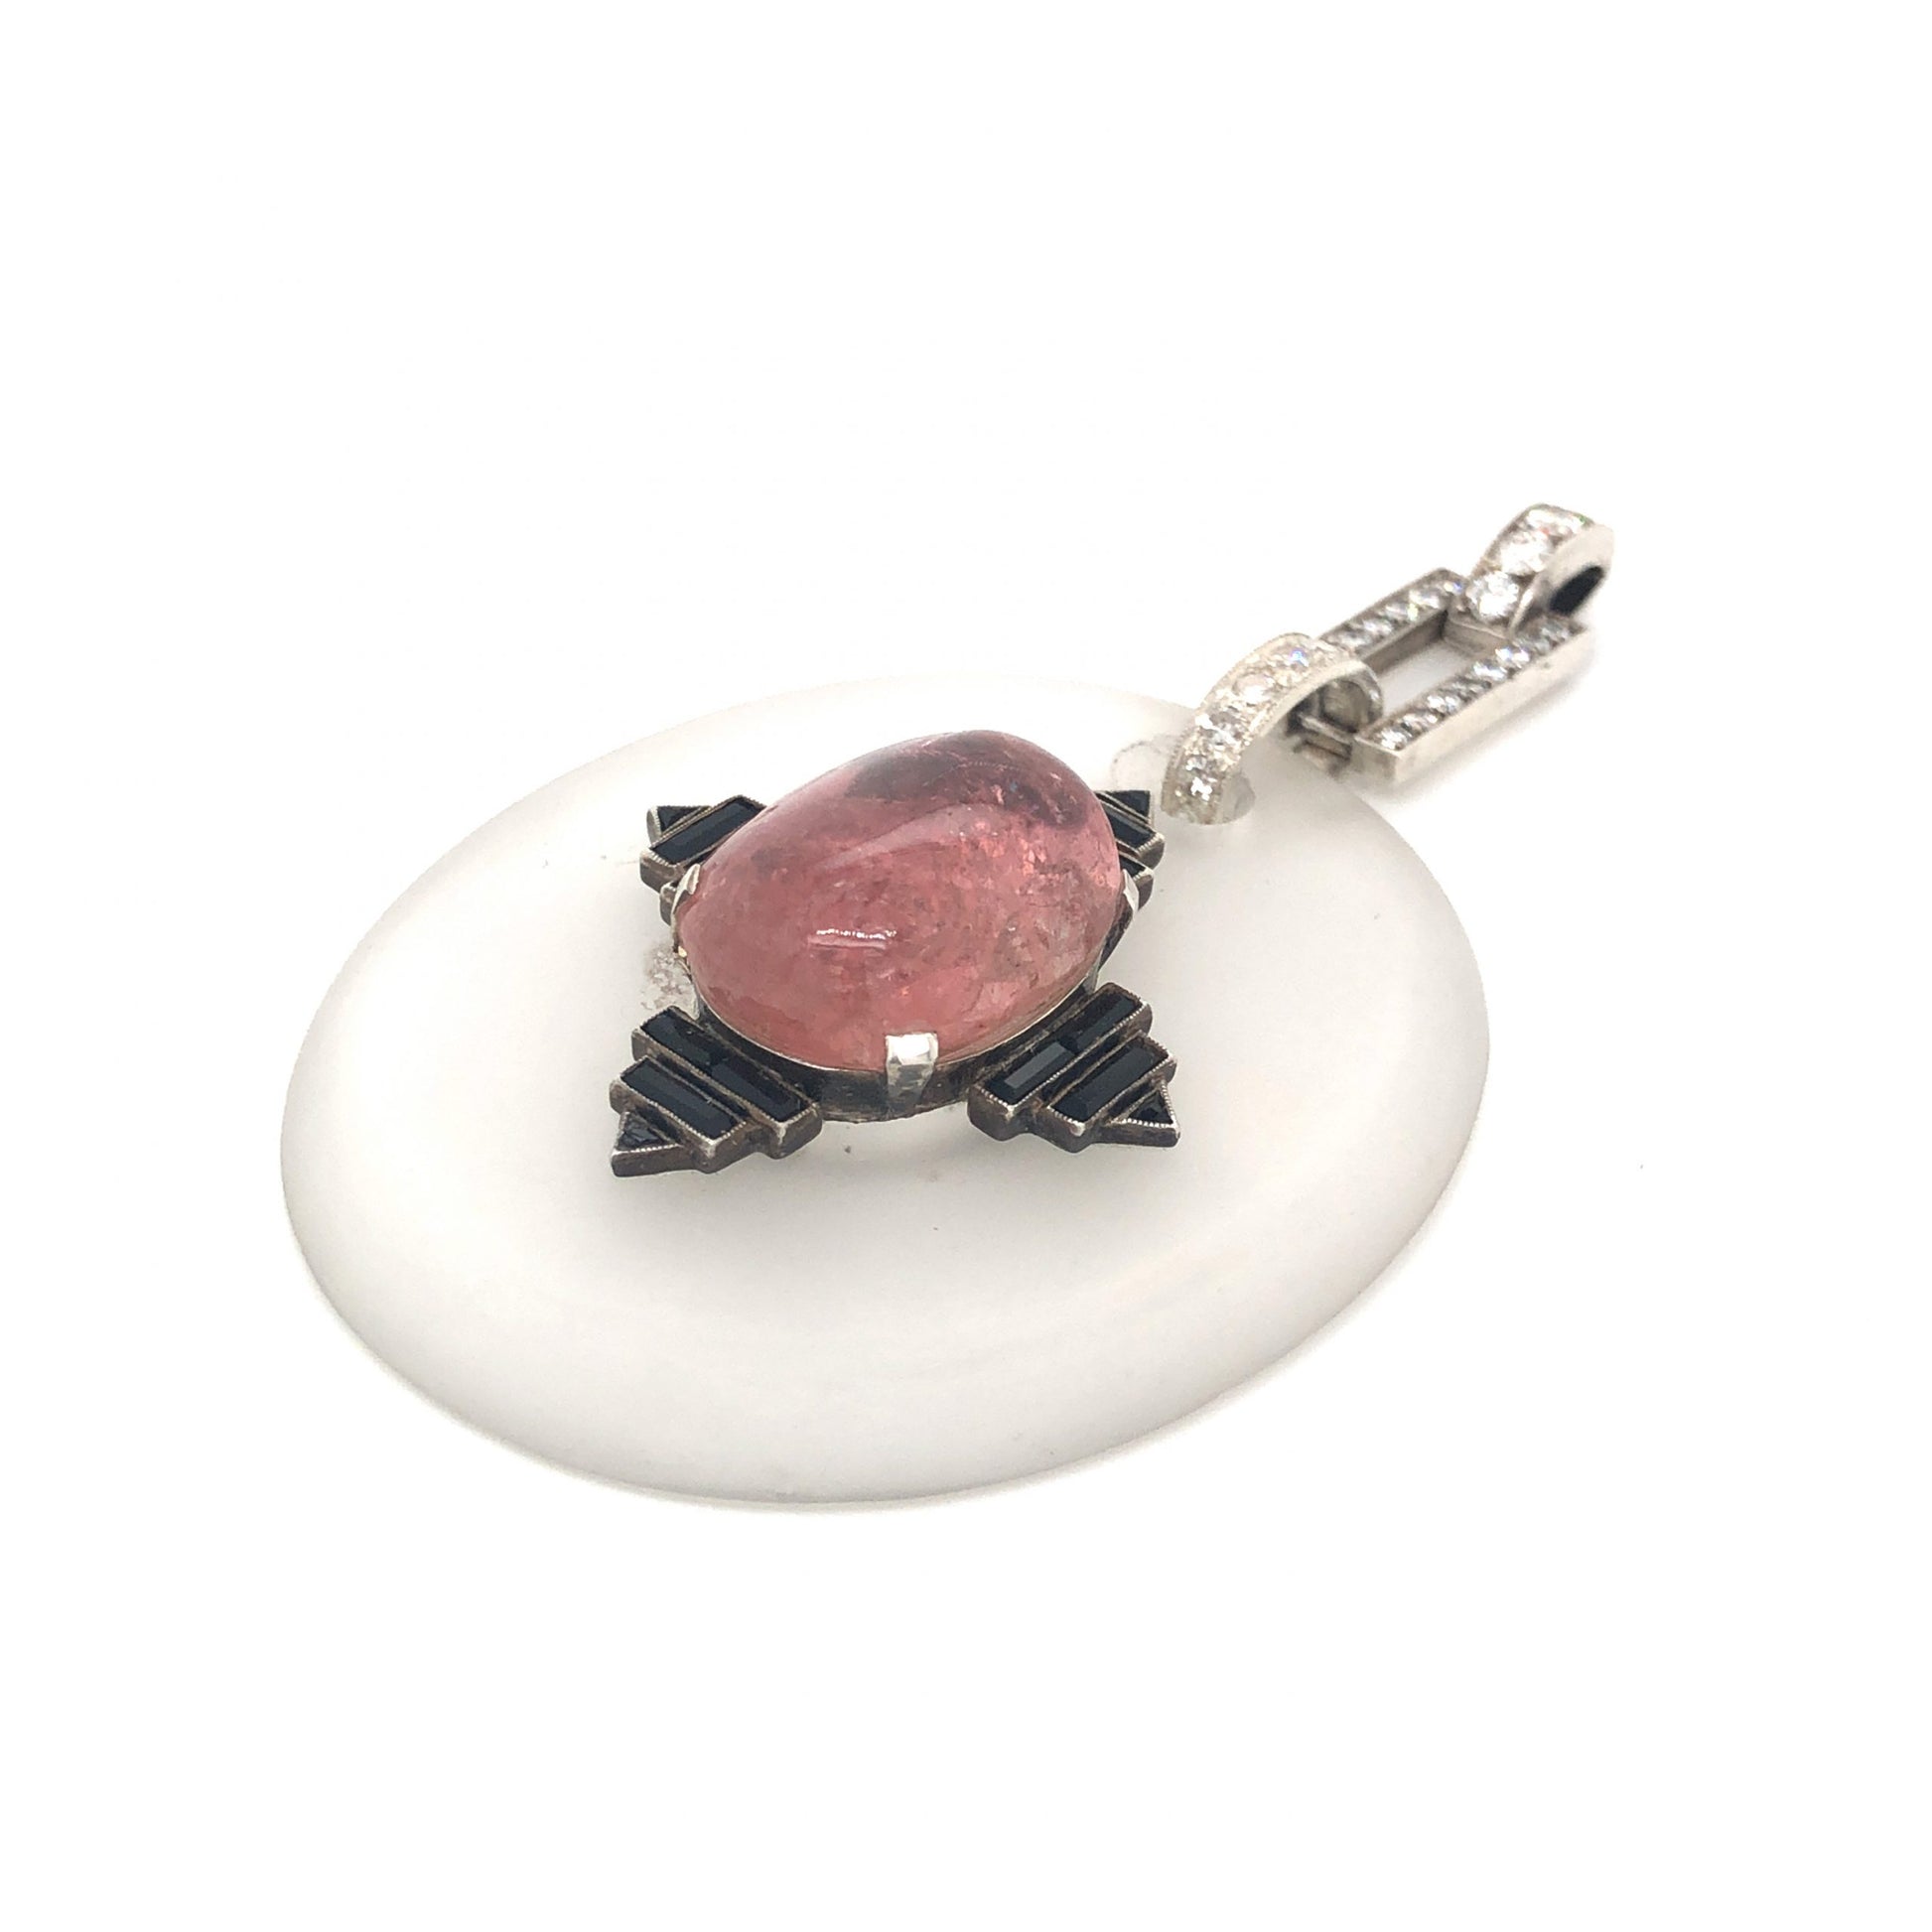 Pink Tourmaline Pendant w/ Diamonds in Sterling SilverComposition: Sterling SilverTotal Diamond Weight: 1.04 ctTotal Gram Weight: 25.3 gInscription: German Sterling